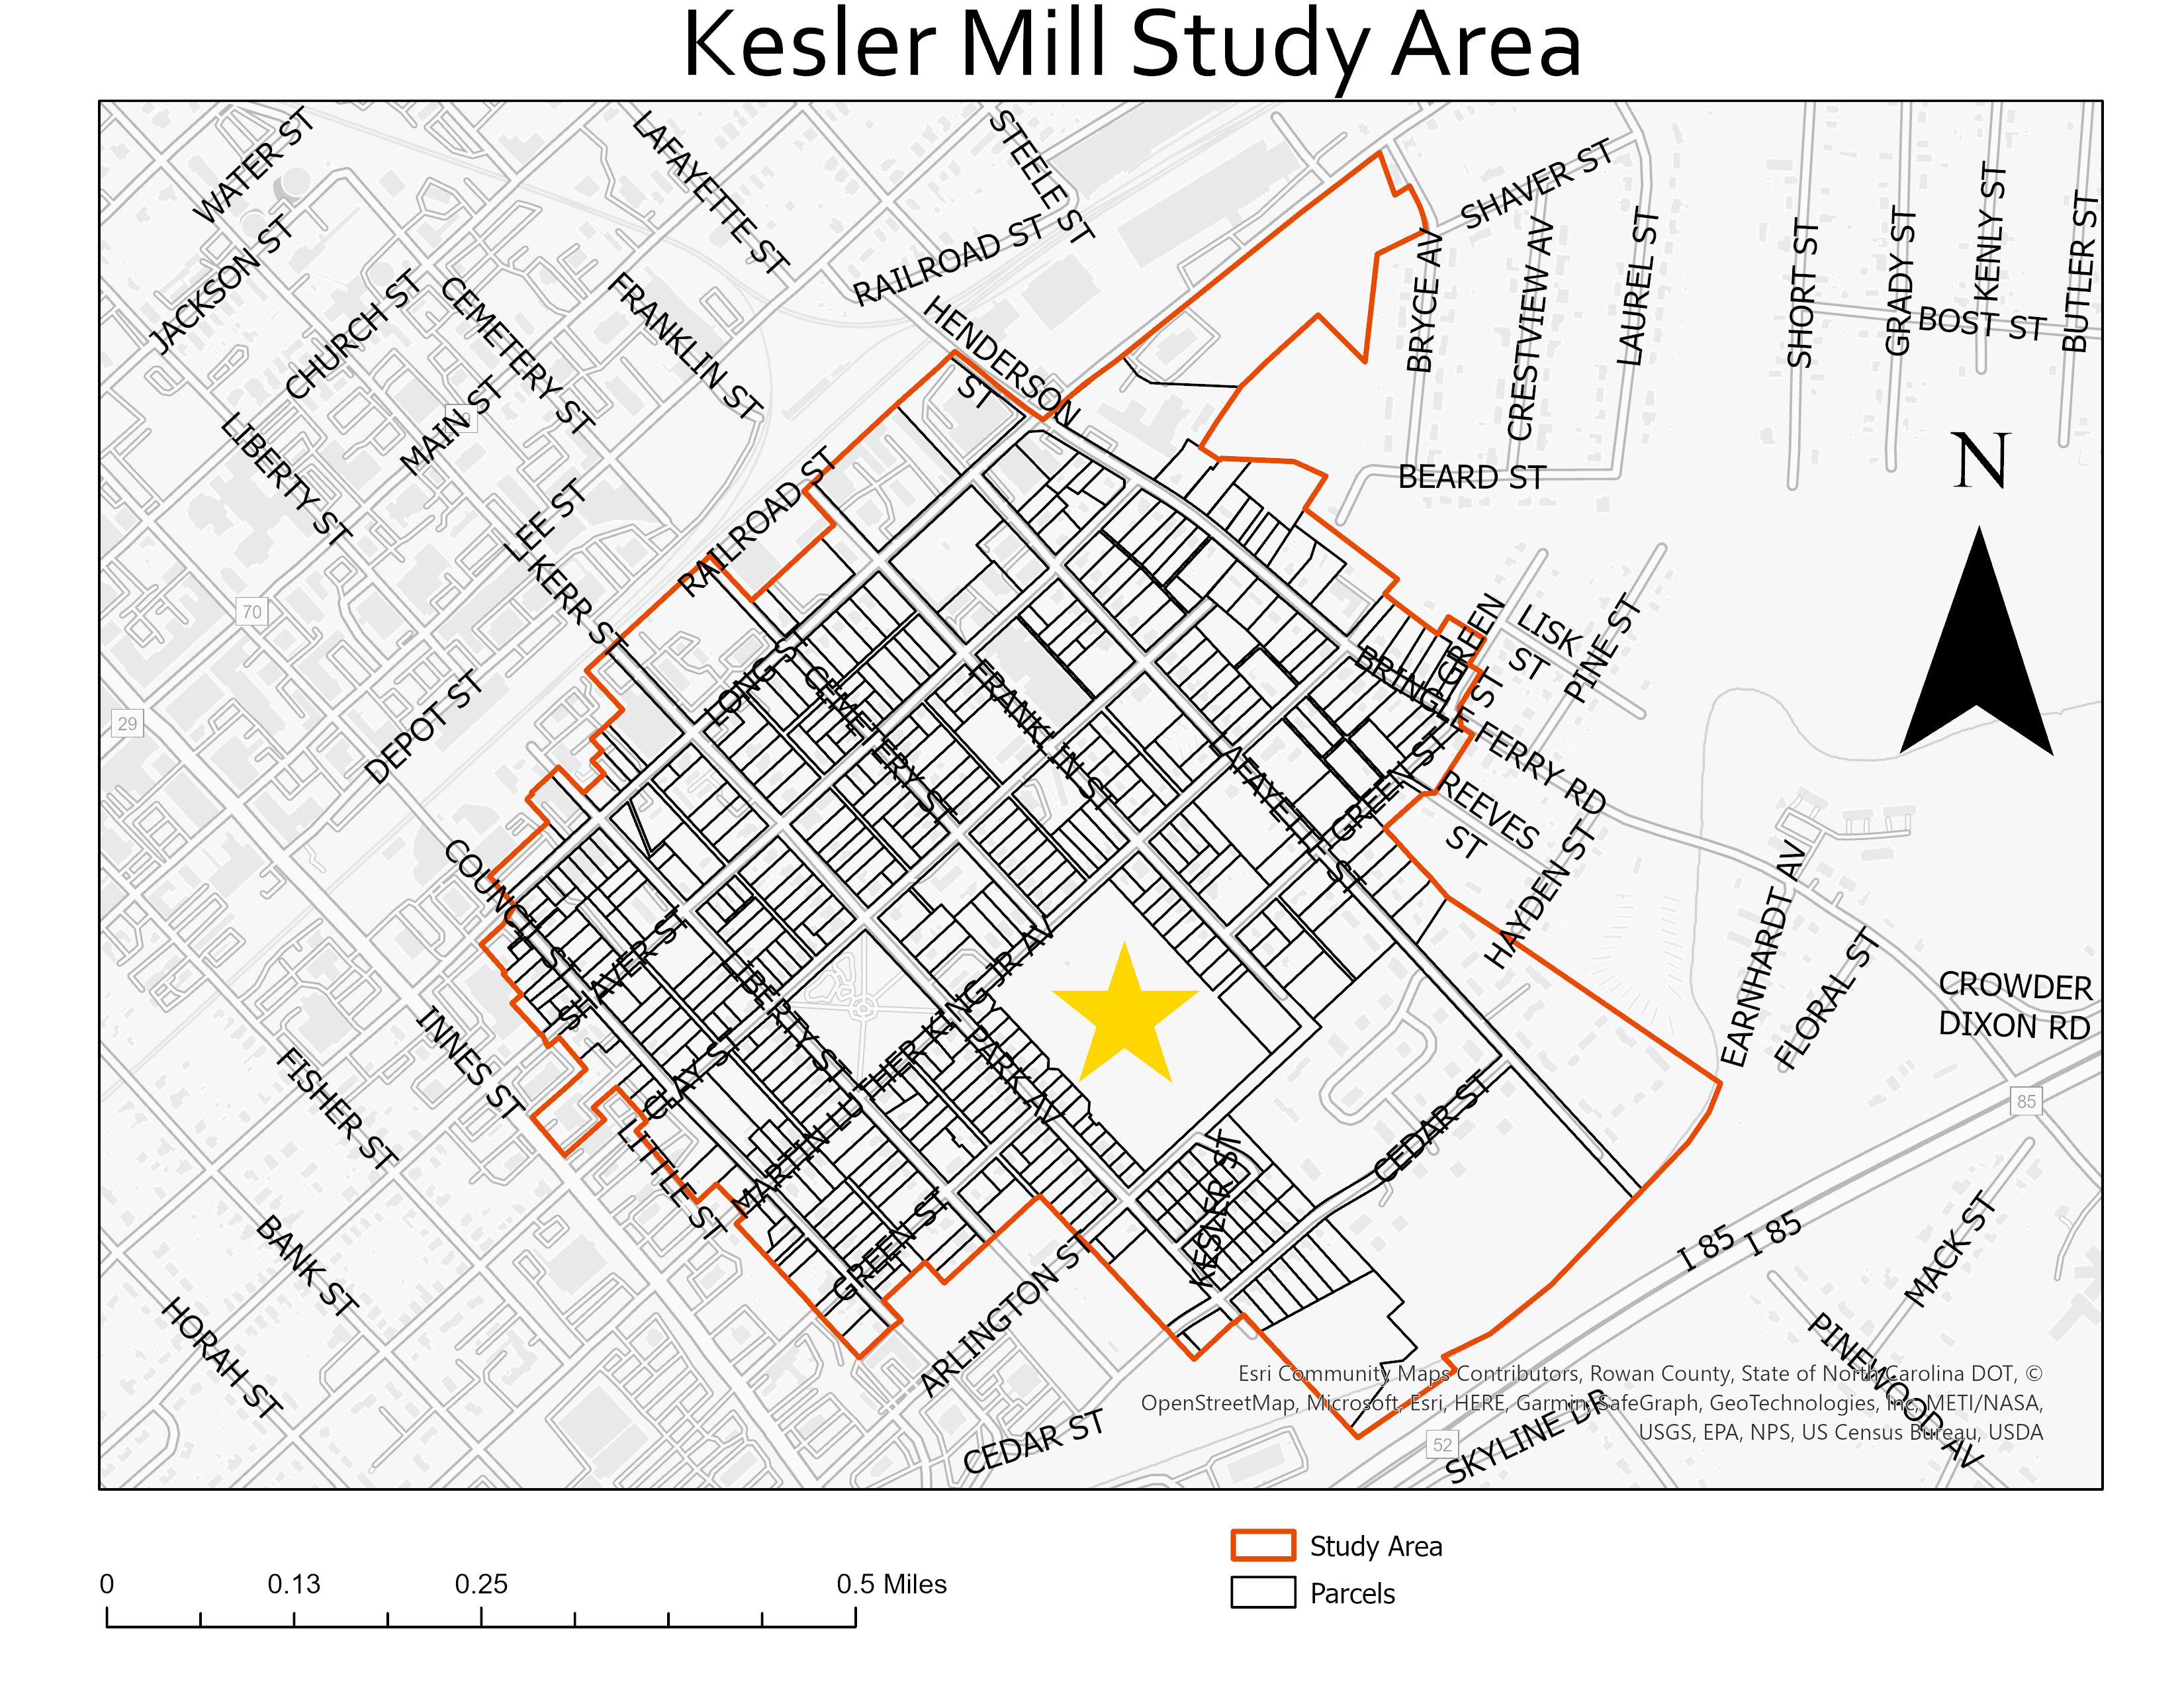 Map of the Kesler Mill Study Area